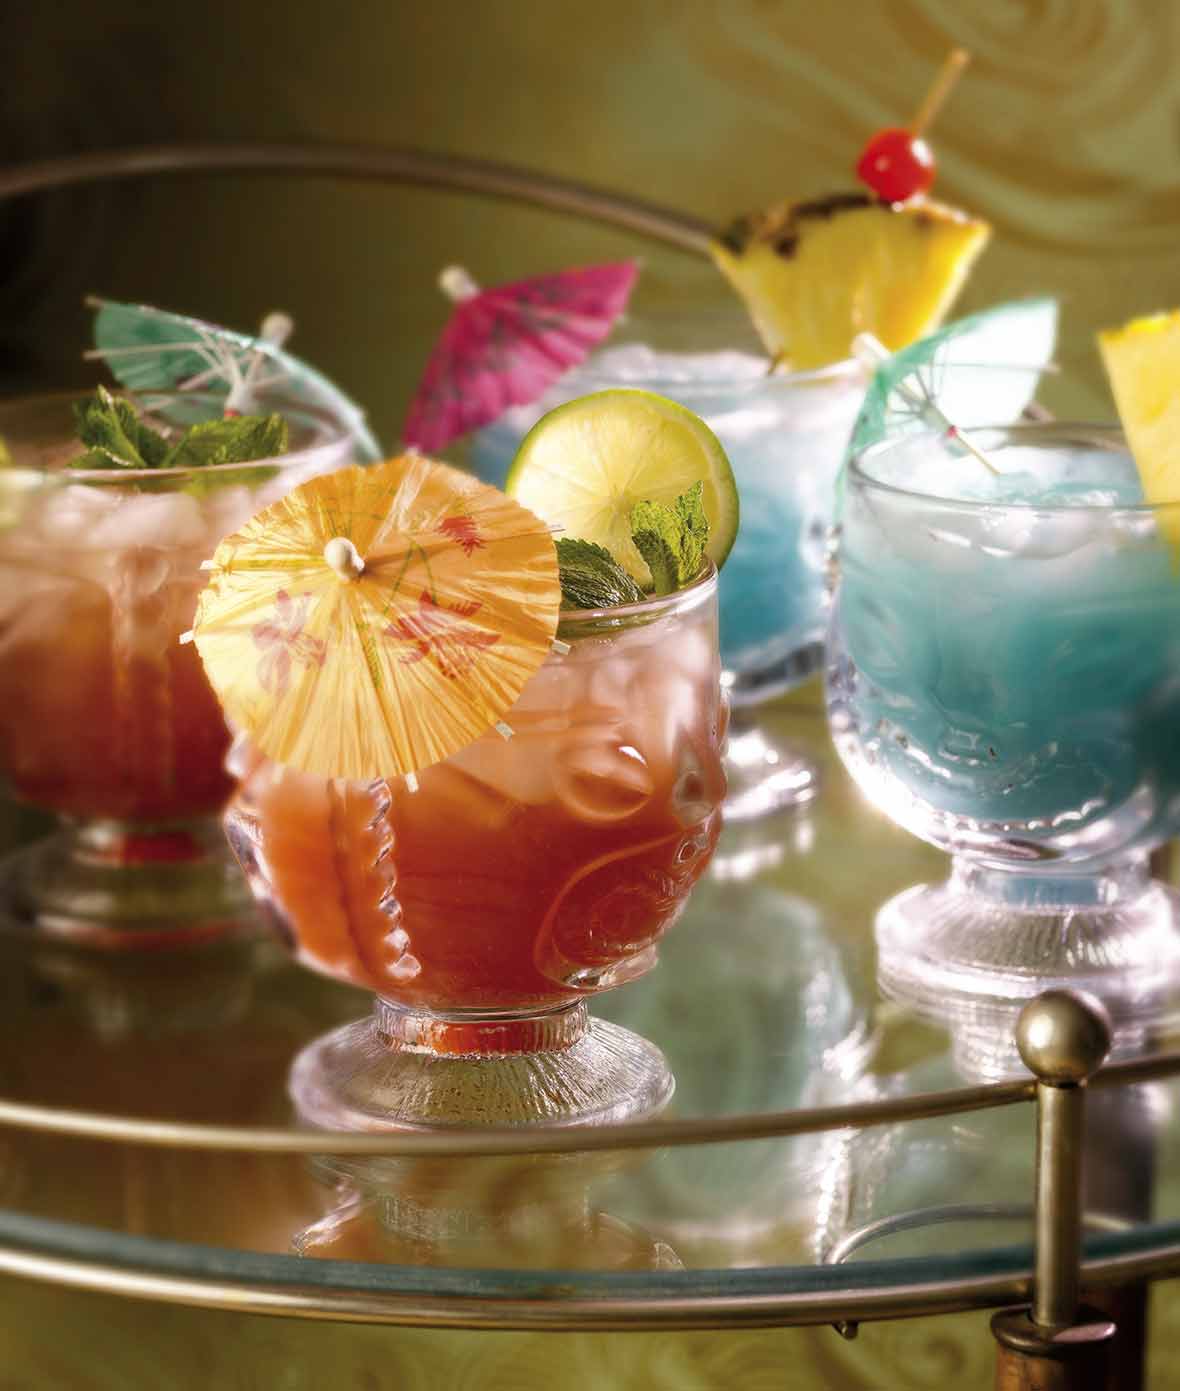 Two of each mai tai and blue Hawaiian cocktails, in glass tiki glasses and garnished with paper umbrellas on a tray.